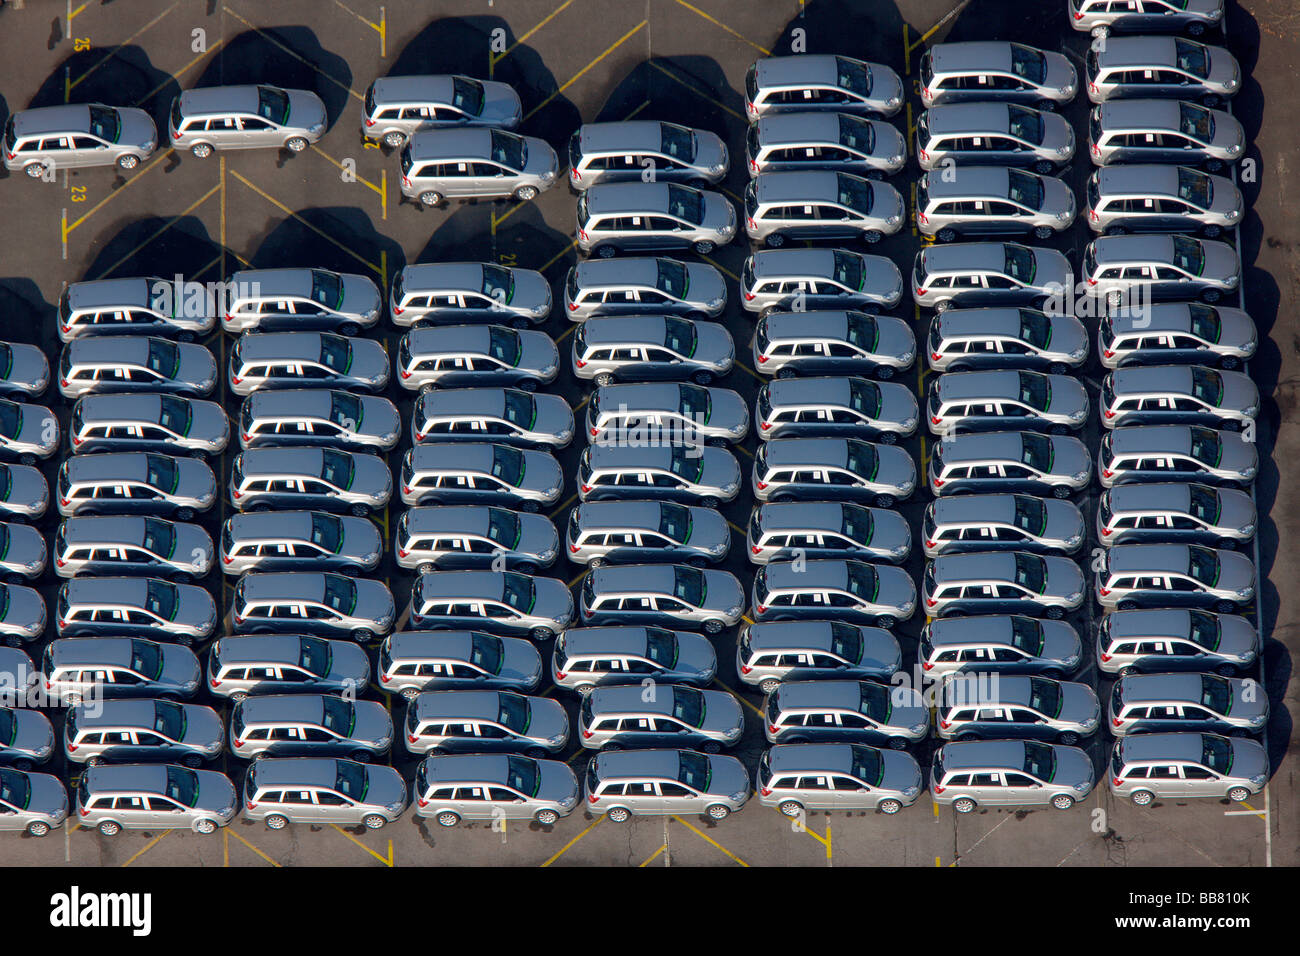 Aerial photo, OPEL Werk 1 Laer, Opel car factory plant 1, parking lot for new ZAFIRA cars before delivery, Bochum, Ruhr distric Stock Photo